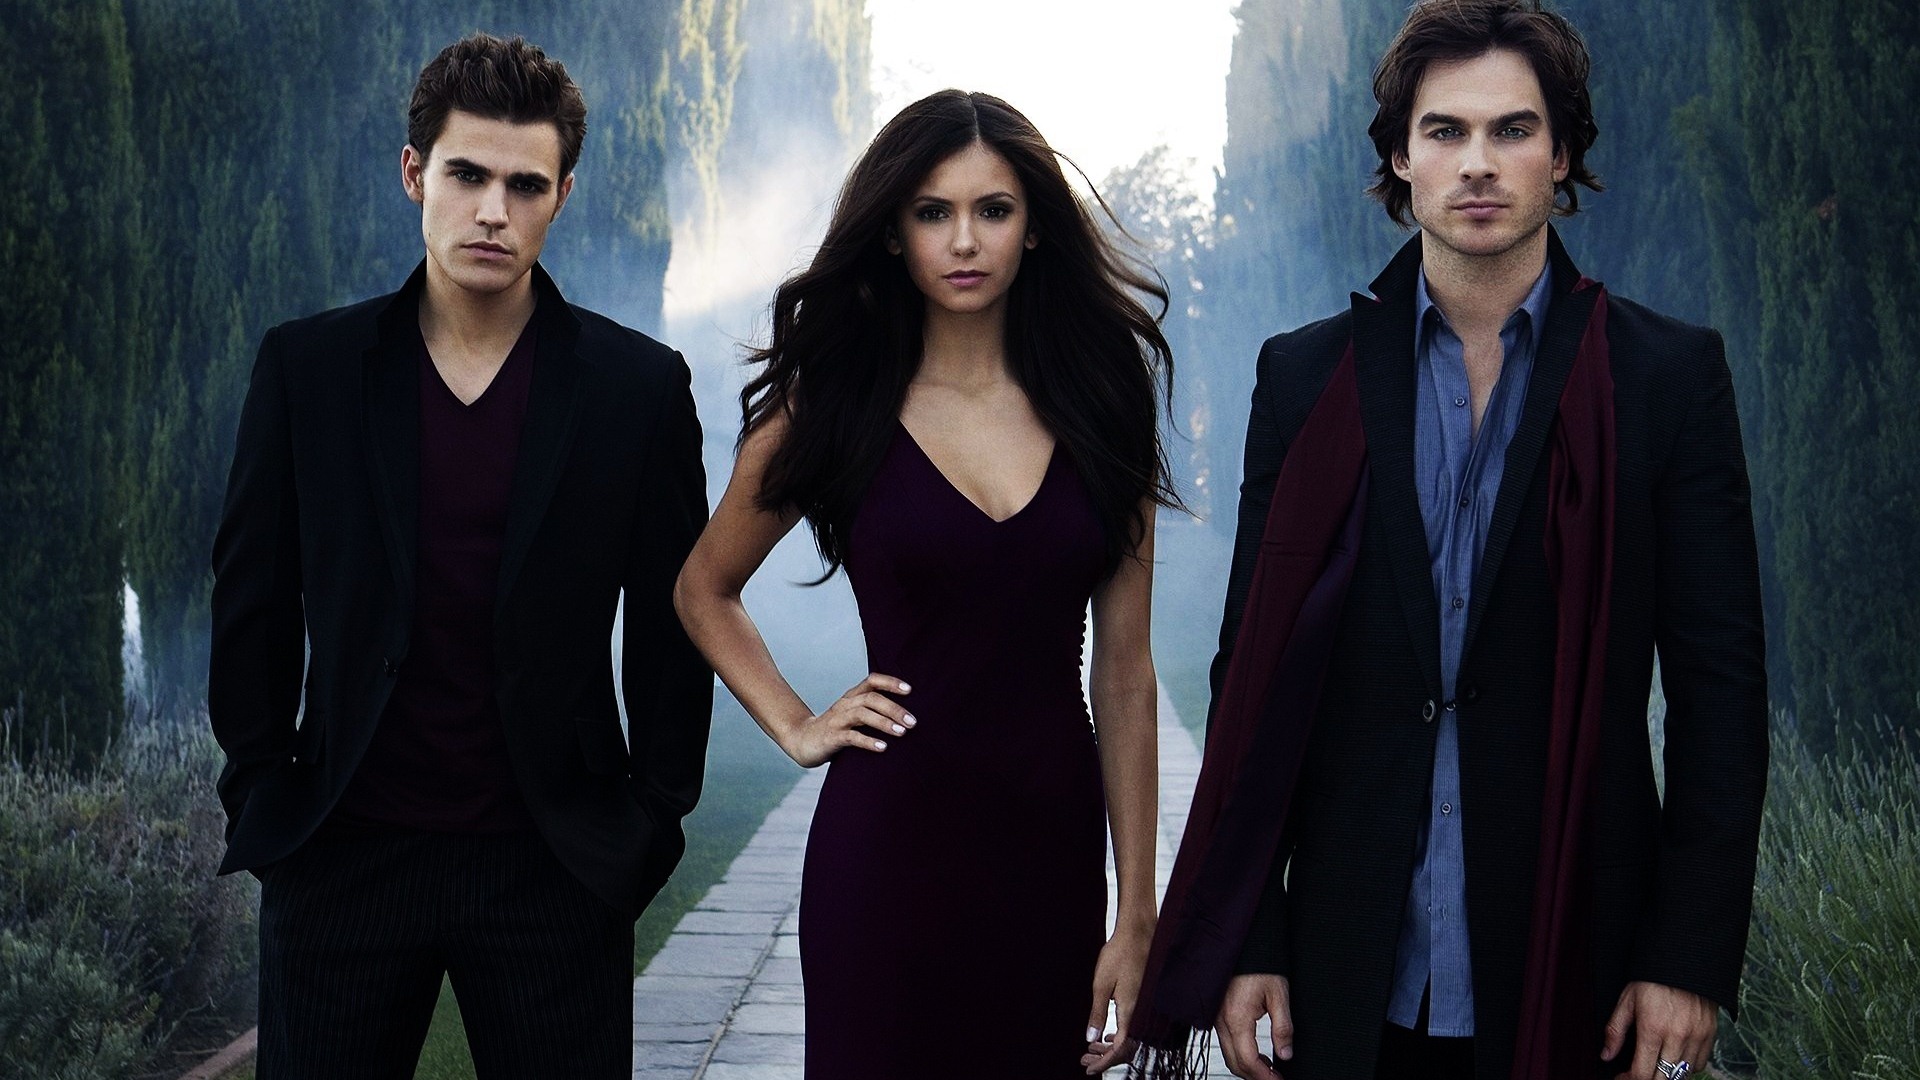 The Vampire Diaries HD Wallpapers #6 - 1920x1080